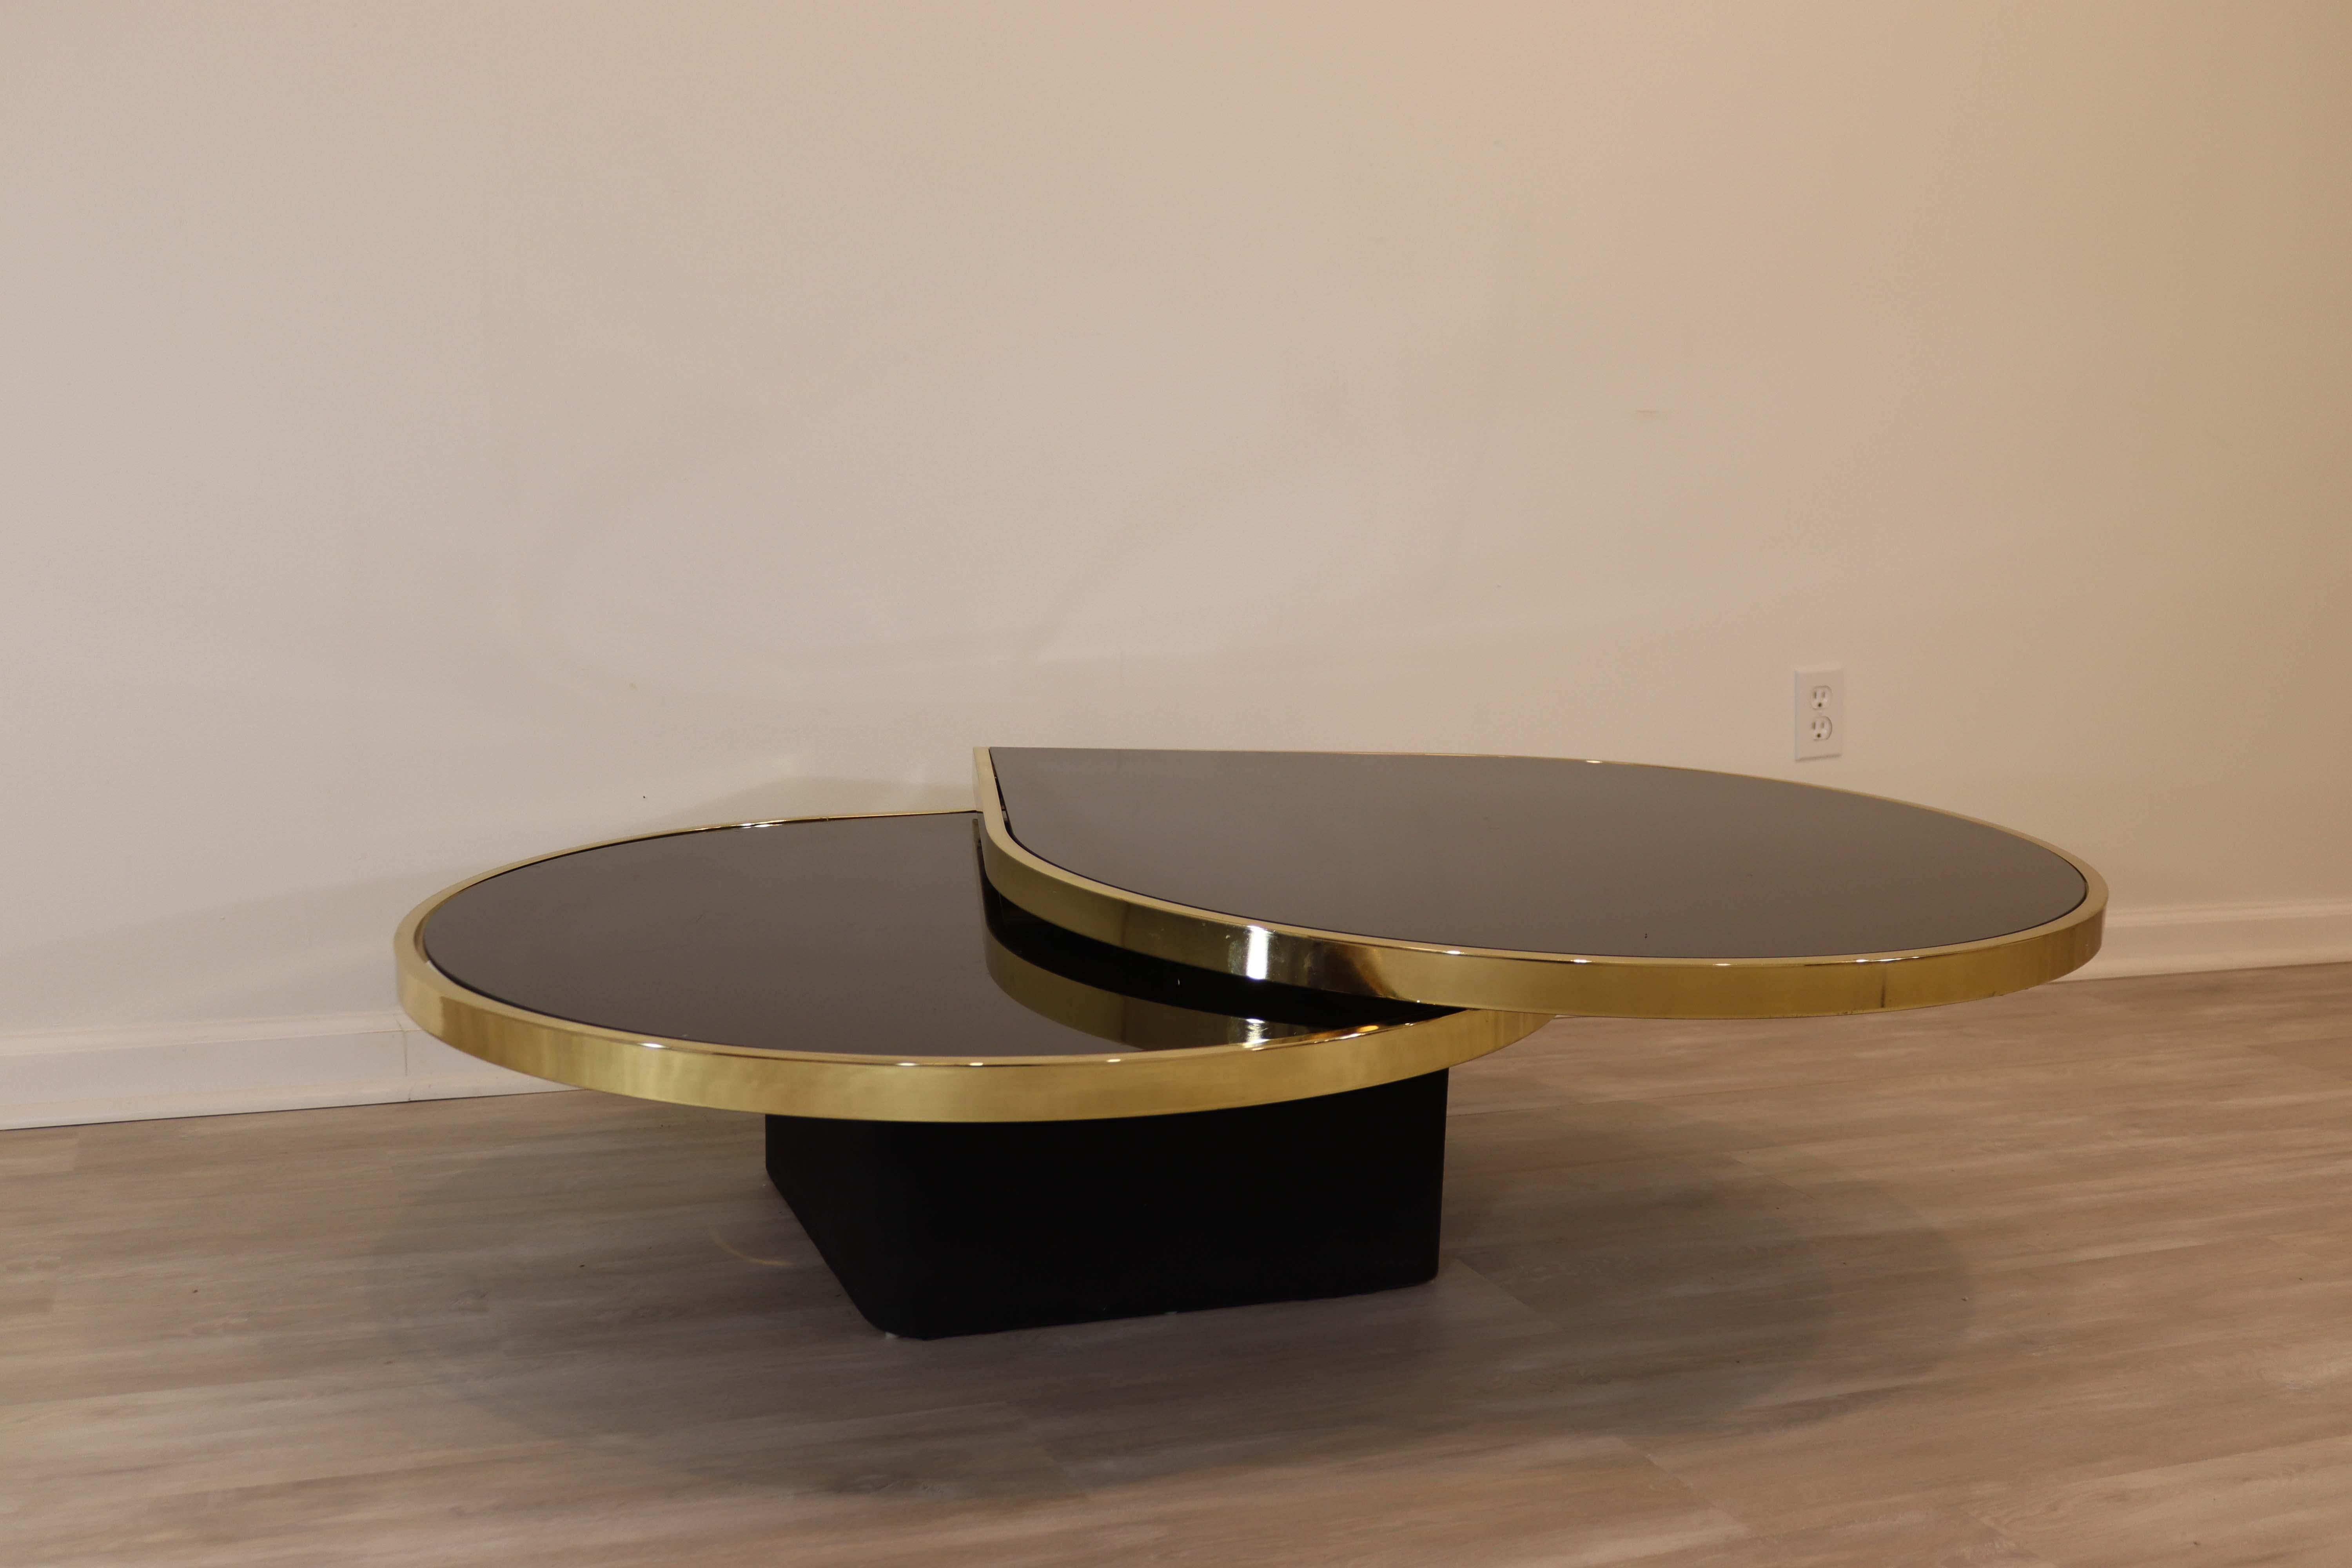 Up for sale is this modern 2-tier coffee table in black glass and brass details from the Design Institute of America circa the 1970's. Each tear drop swivels independently of the other, extending to a full 64